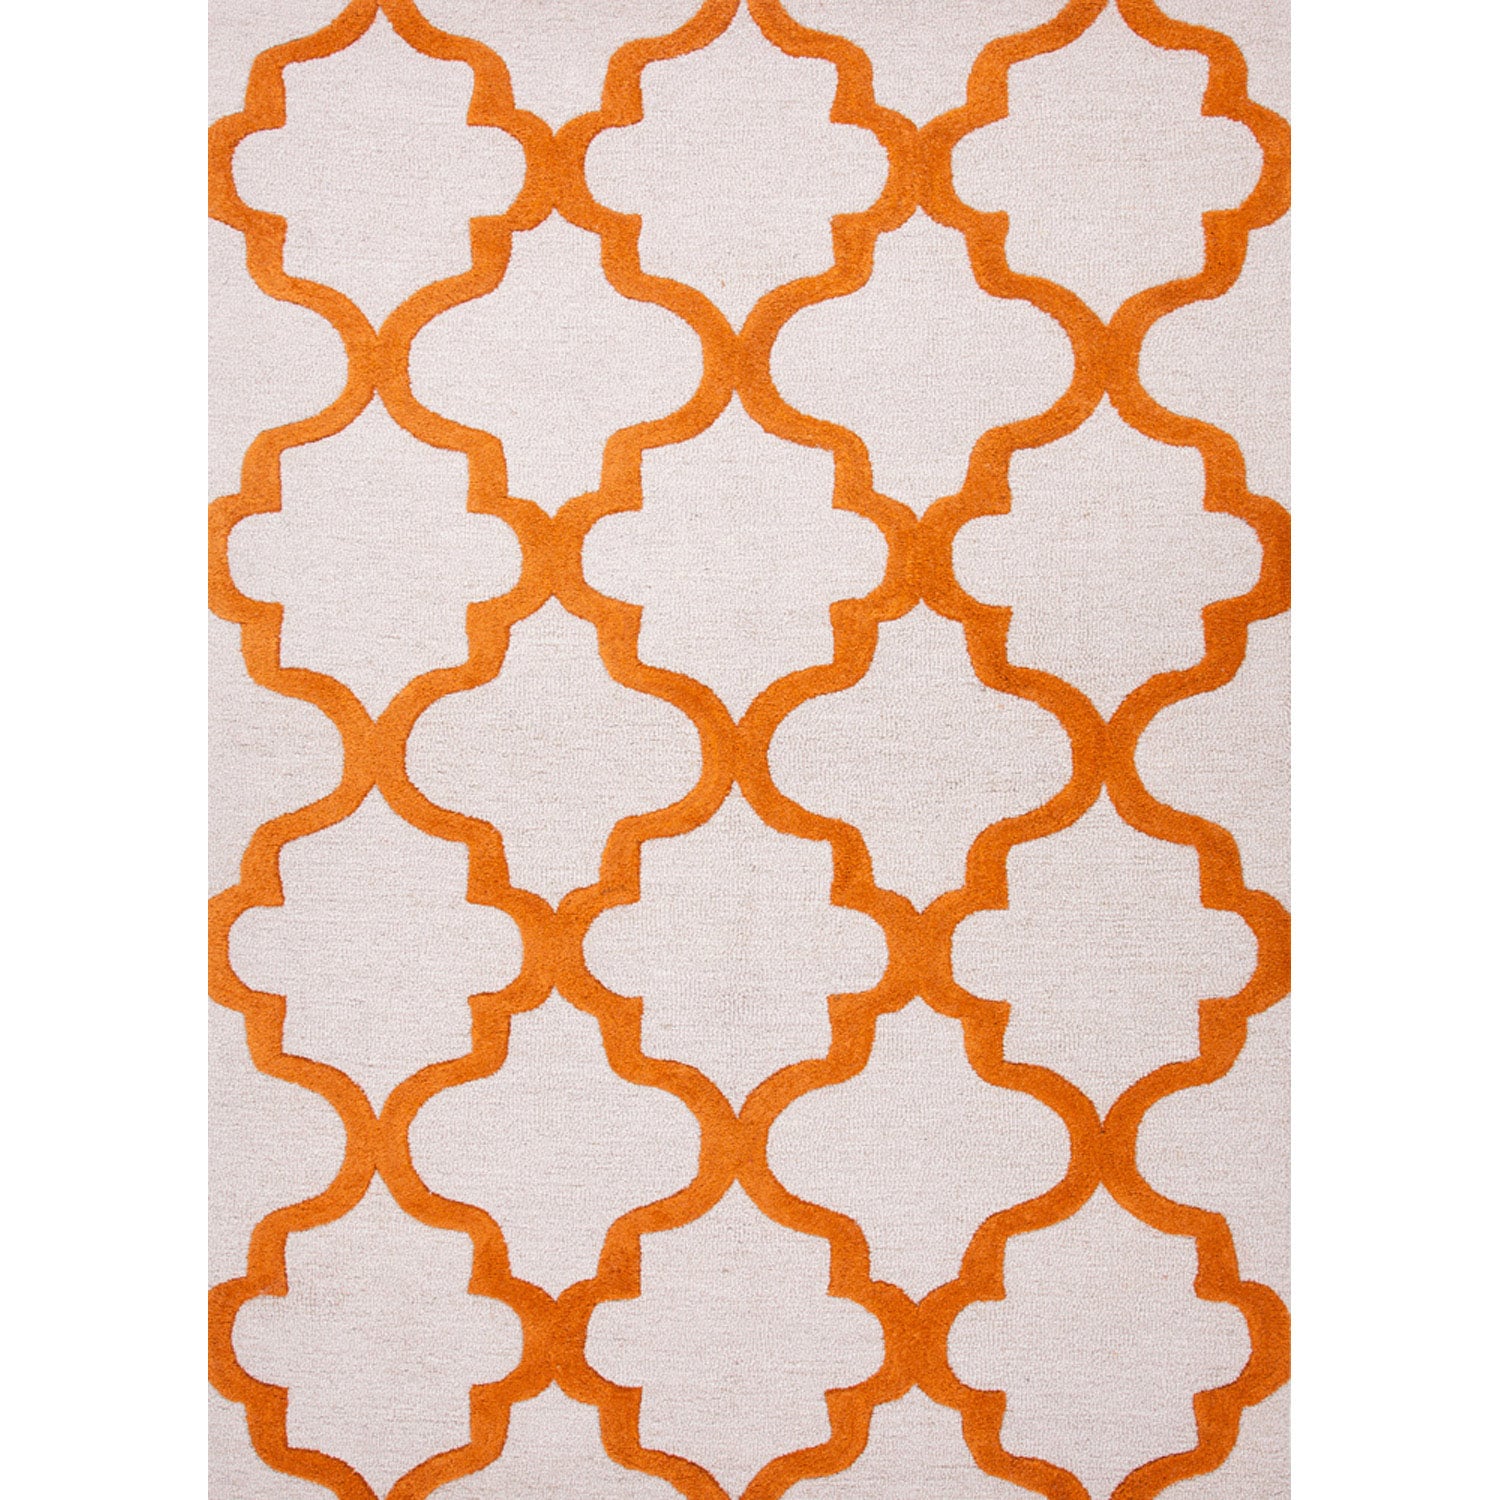 Hand tufted Textured Contemporary Geometric Red/ Orange Rug (2 X 3)